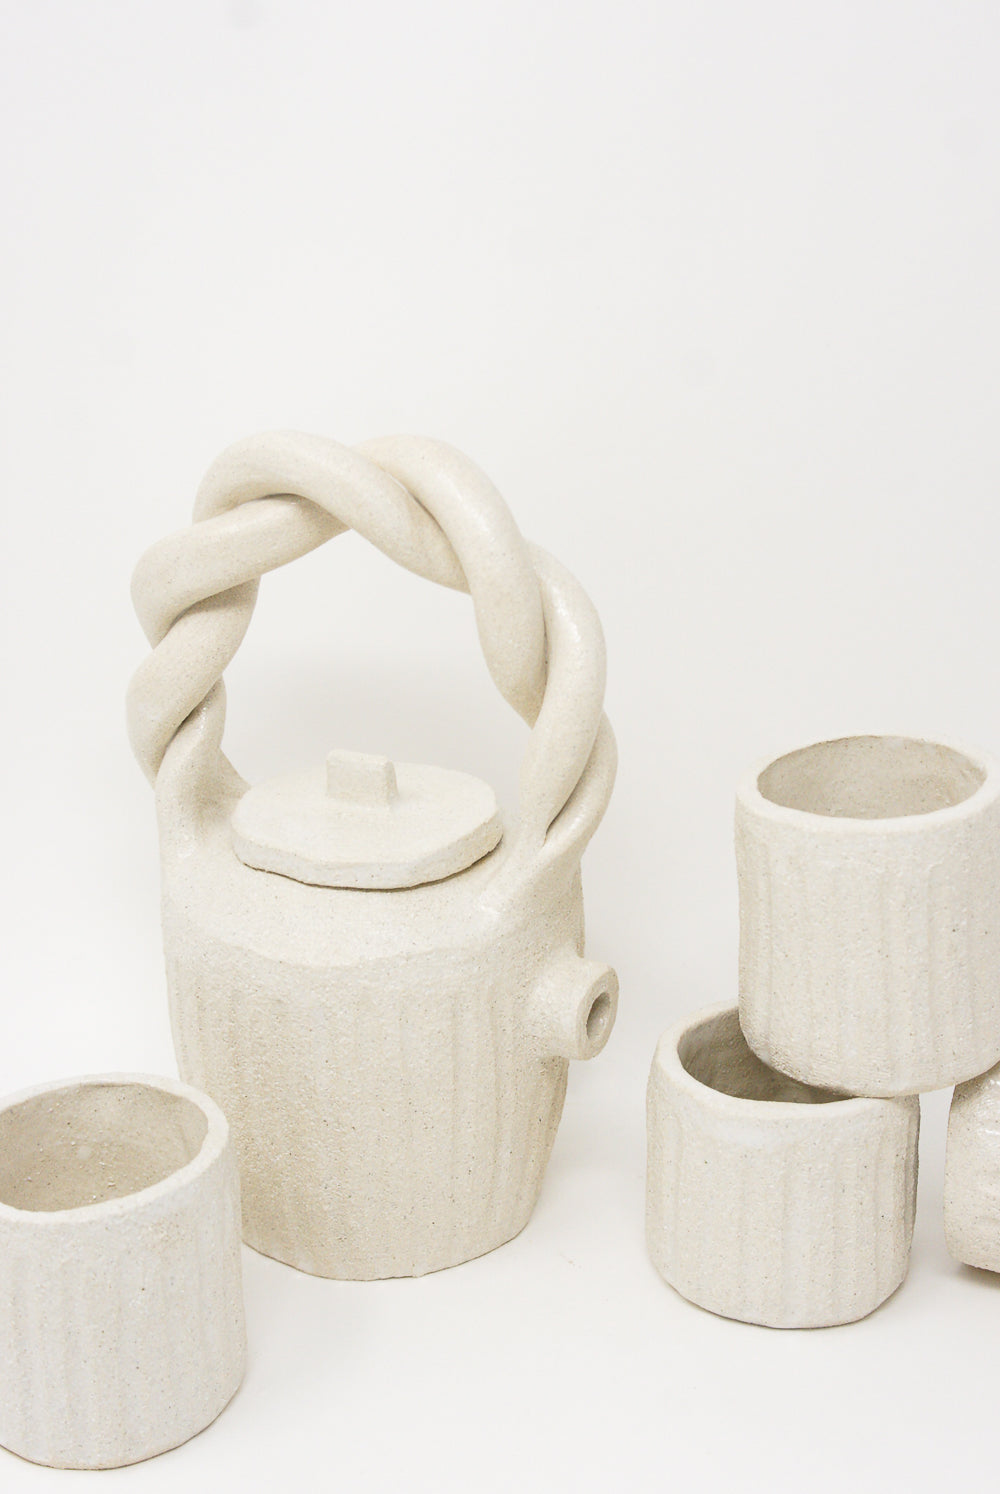 A Tea Cup in Natural by Clandestine on a white surface, handmade in Spain.